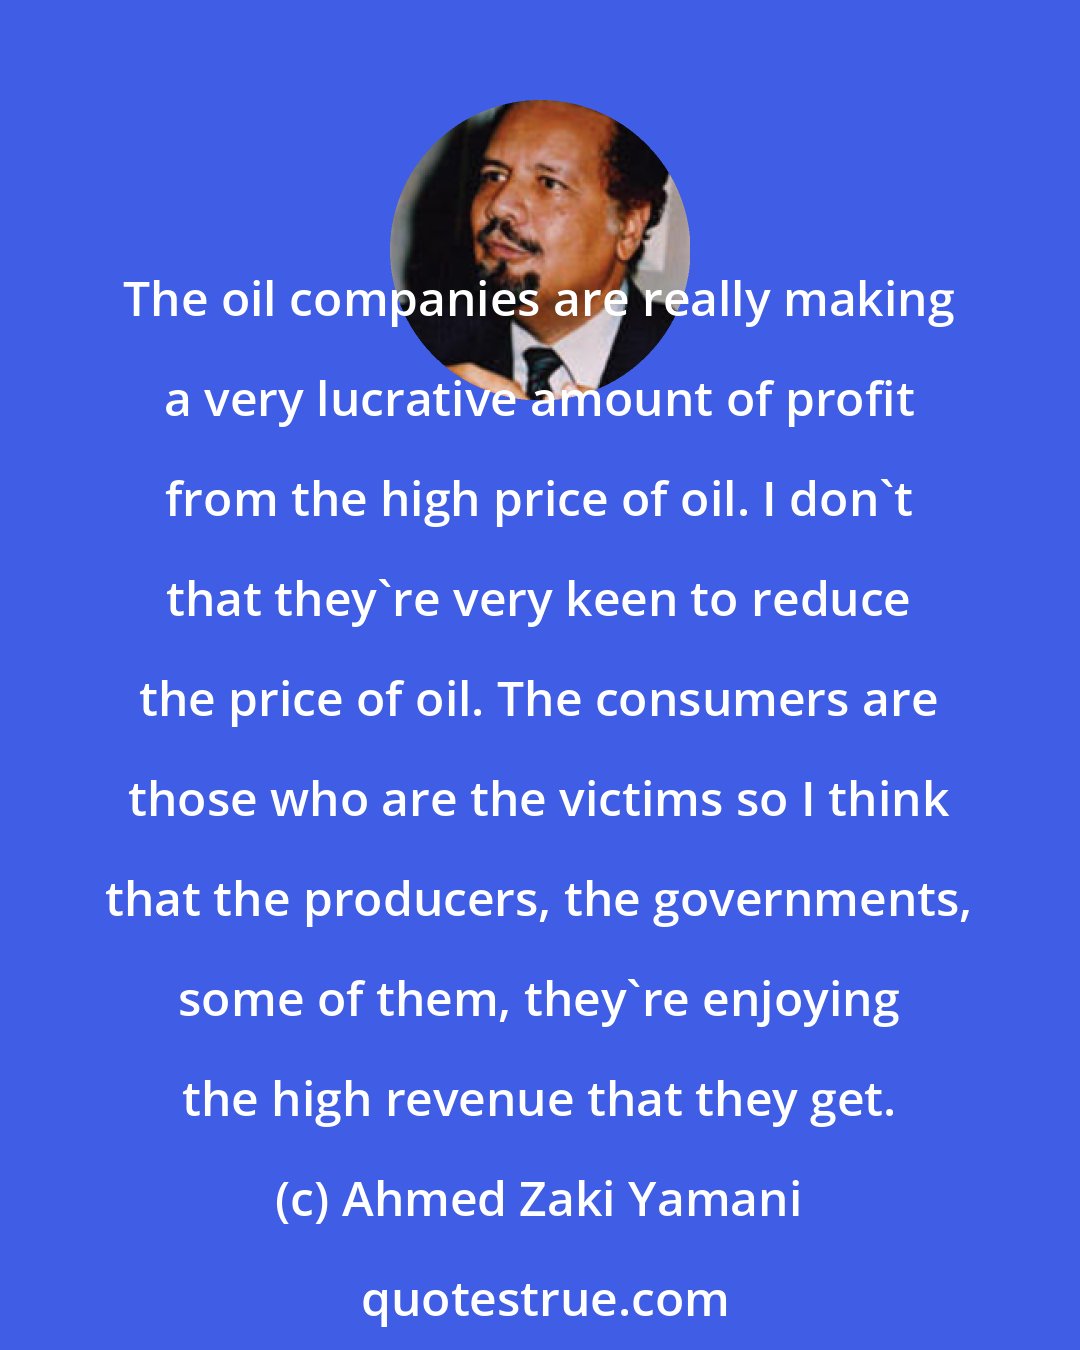 Ahmed Zaki Yamani: The oil companies are really making a very lucrative amount of profit from the high price of oil. I don't that they're very keen to reduce the price of oil. The consumers are those who are the victims so I think that the producers, the governments, some of them, they're enjoying the high revenue that they get.